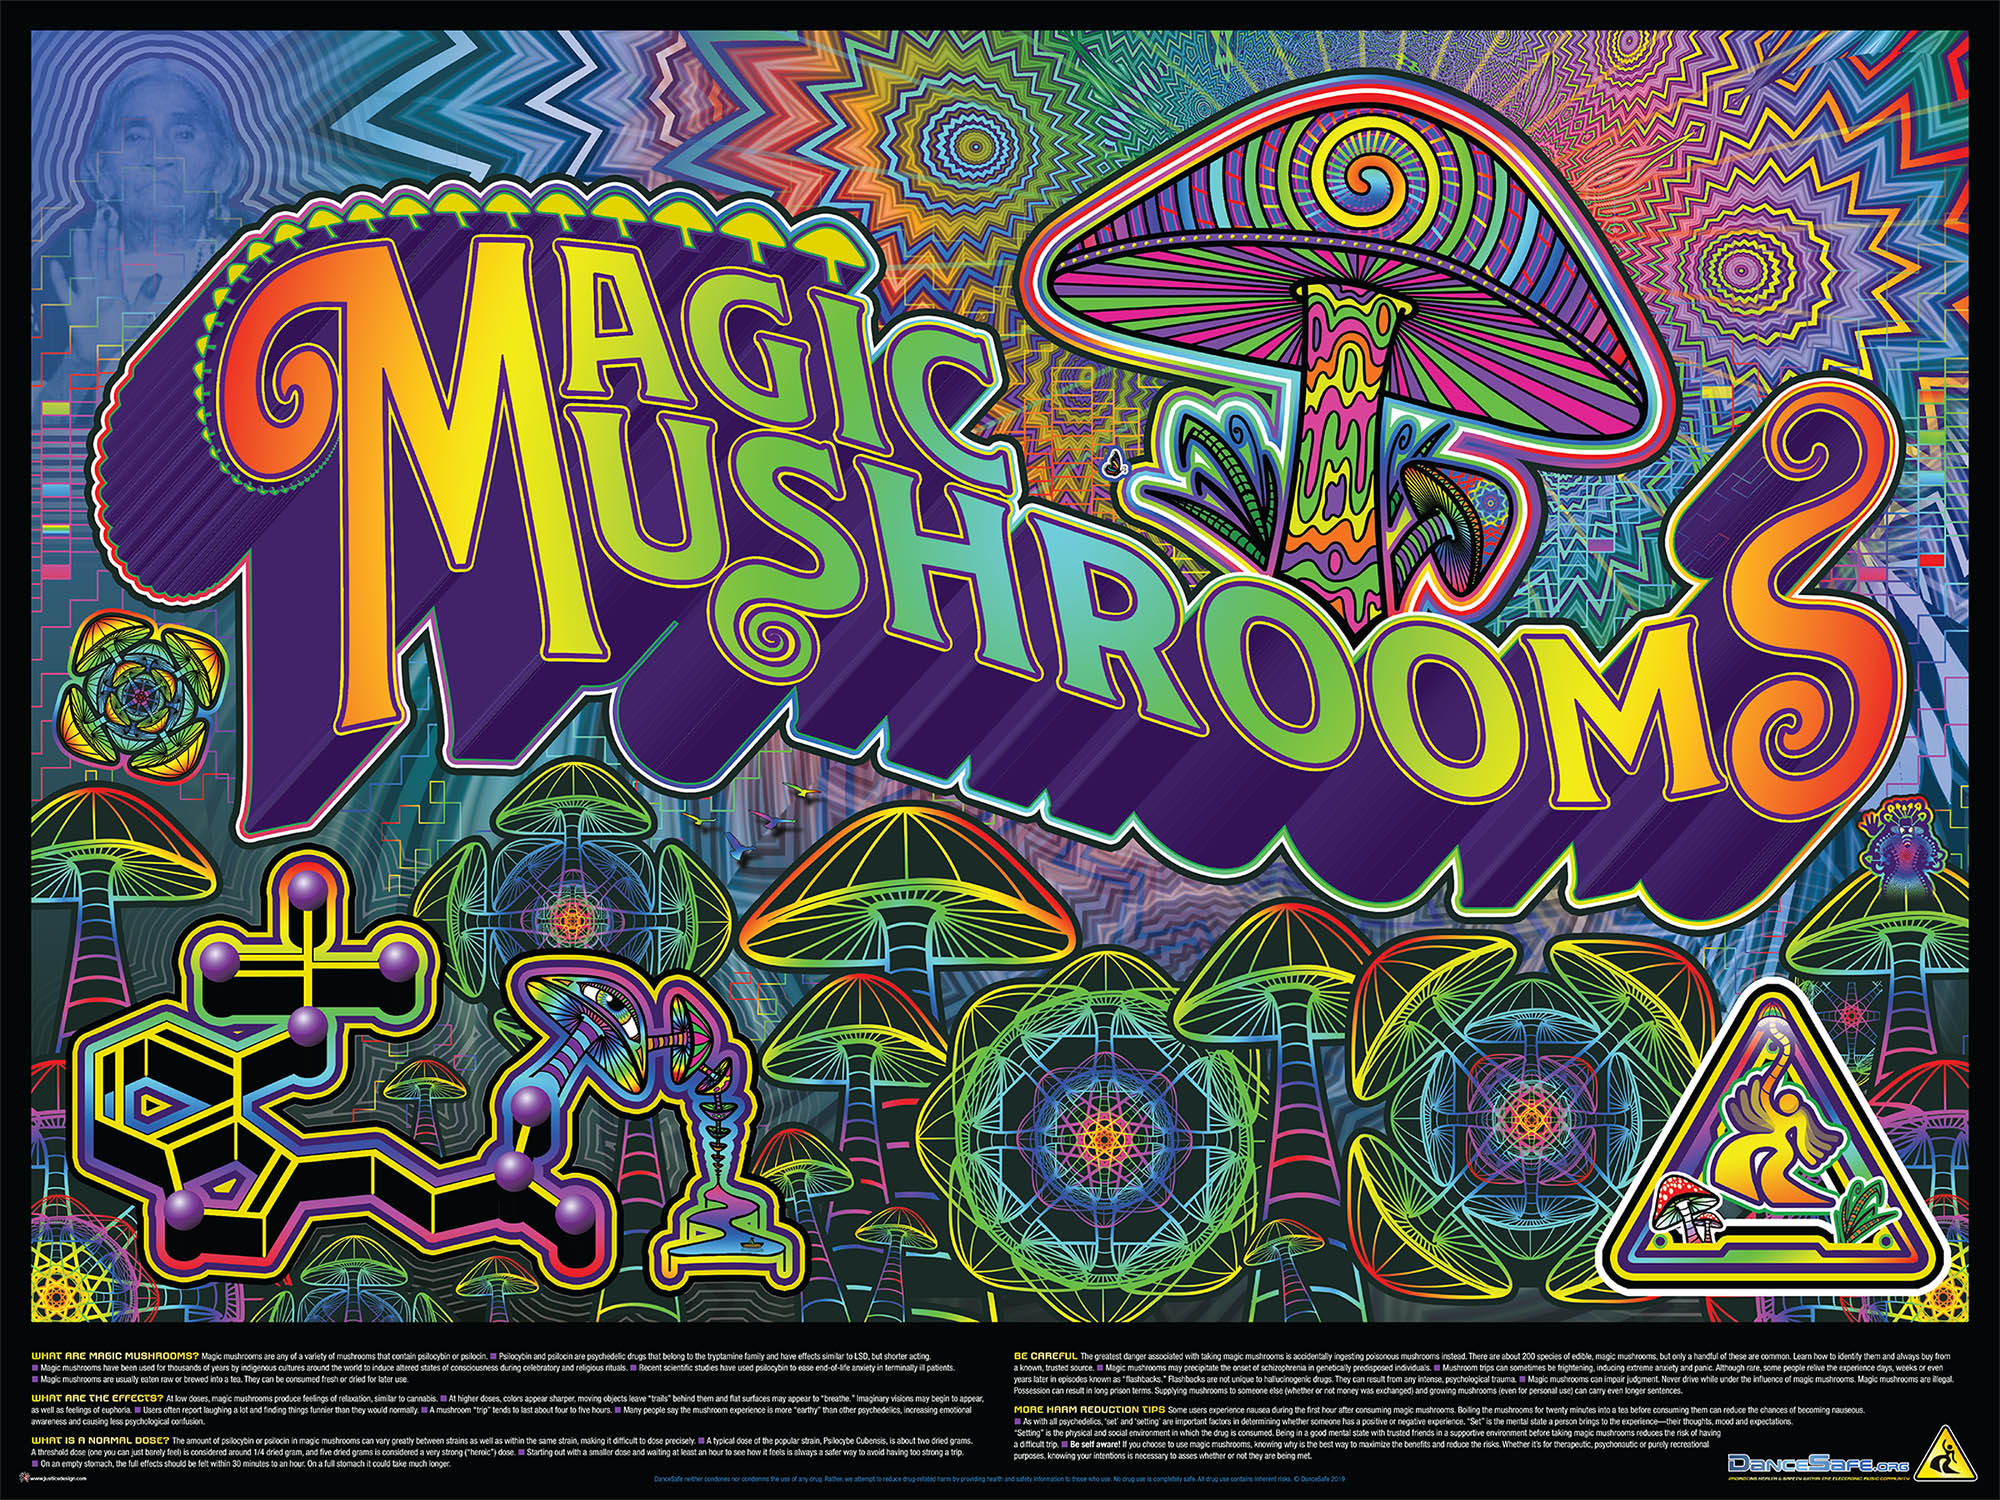 The DanceSafe mushroom poster, with the mushroom card art on top and information about mushrooms on the bottom.